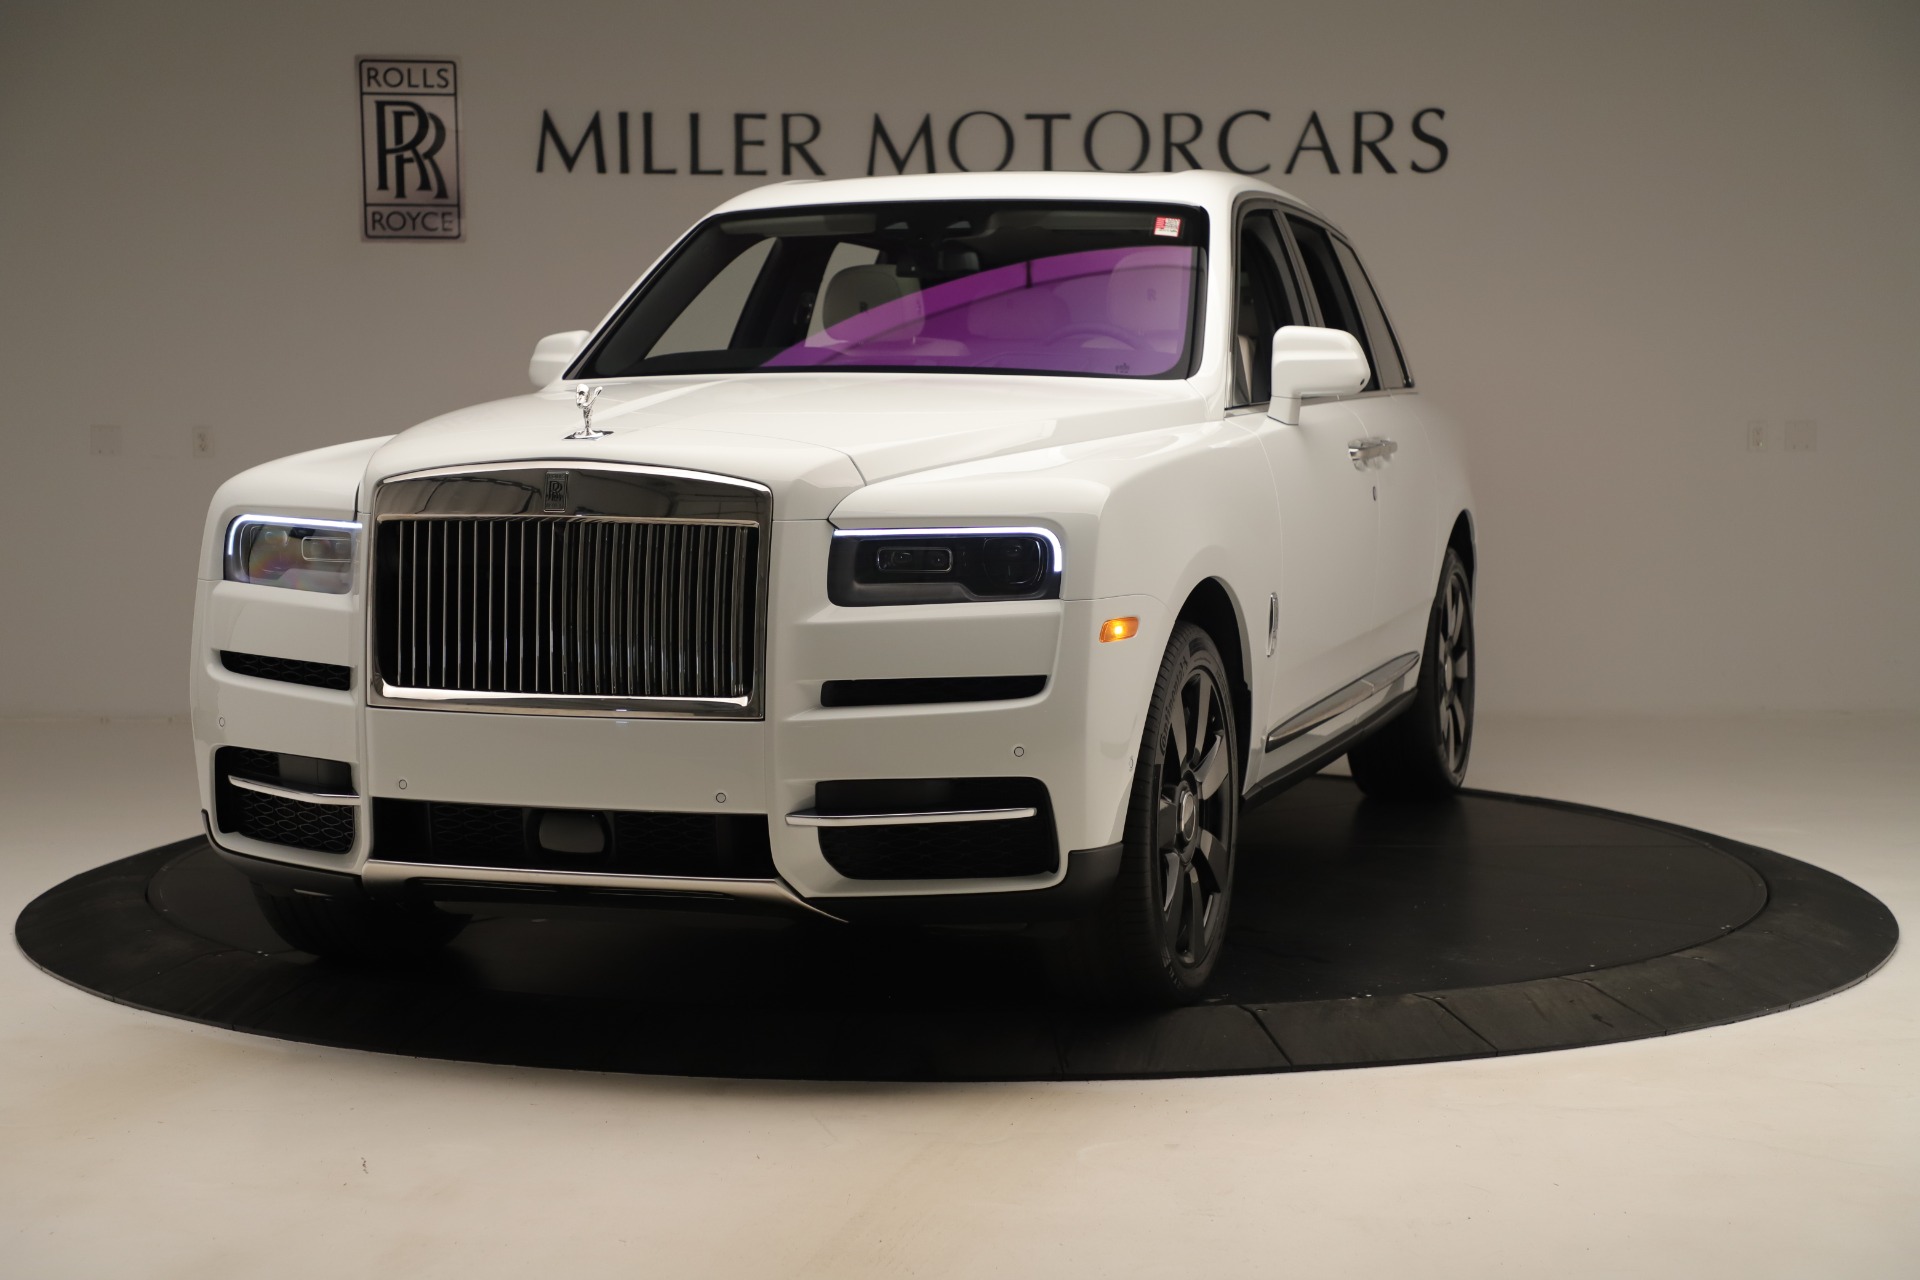 New 2019 Rolls-Royce Cullinan for sale Sold at Maserati of Greenwich in Greenwich CT 06830 1